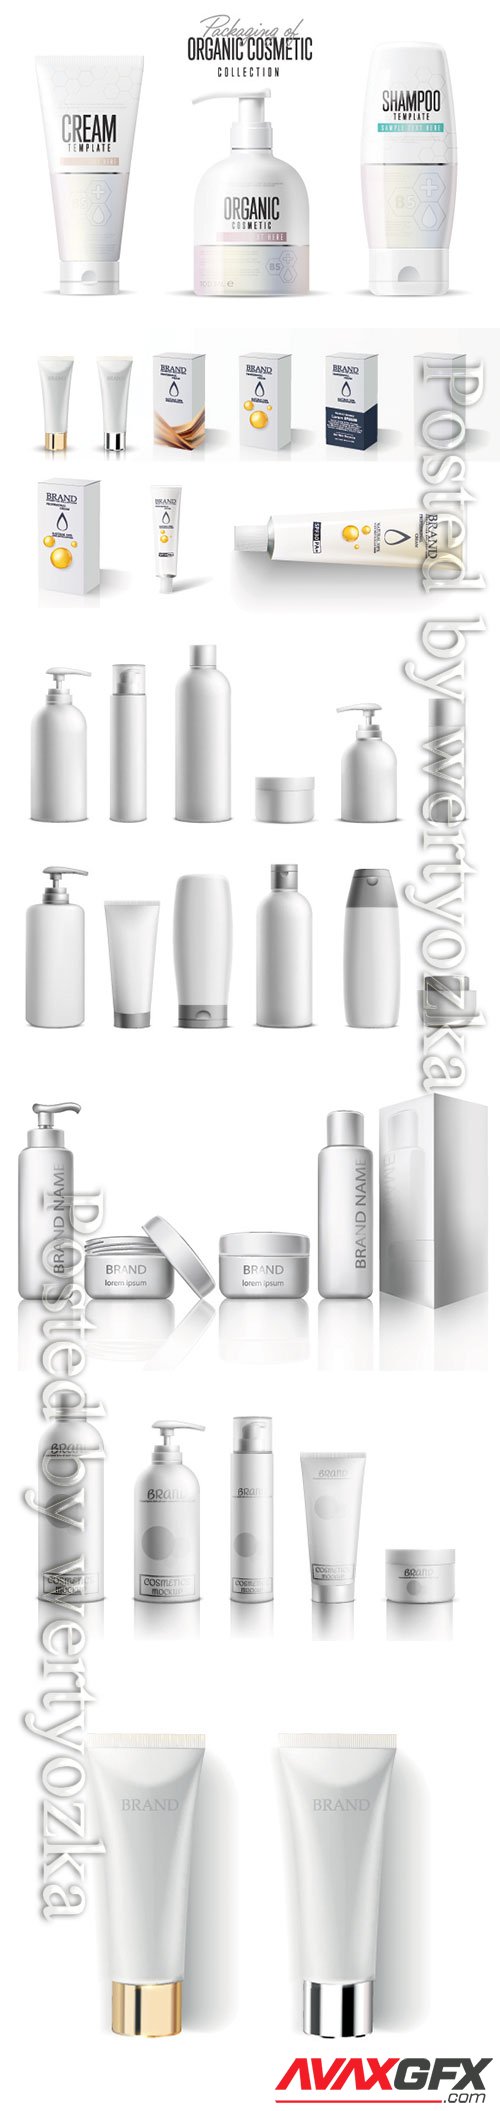 Cosmetic package mockup vector set, beauty product bottles